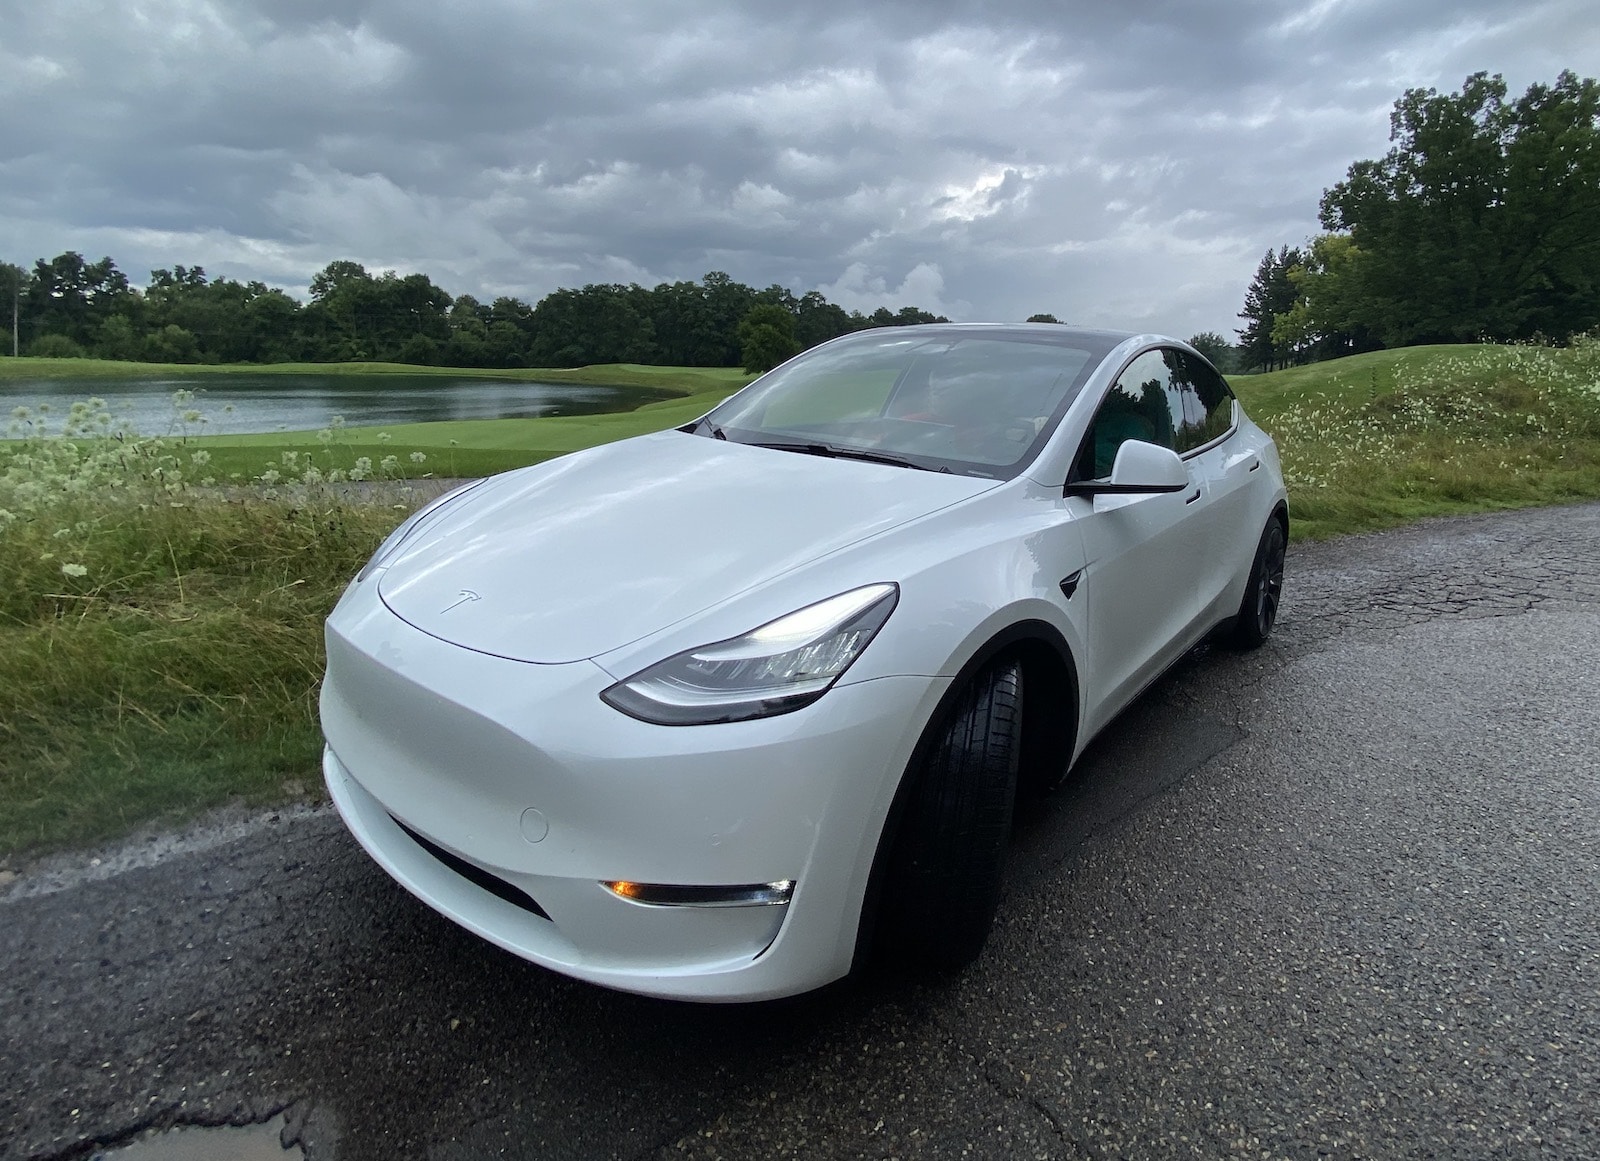 Tesla Model S 2020 White Interior : 2021 Tesla Model S Review Pricing And Specs / In early 2020, a wireless update added 'cheetah stance,' which puts the car into an optimal setting for launches from a standing start.